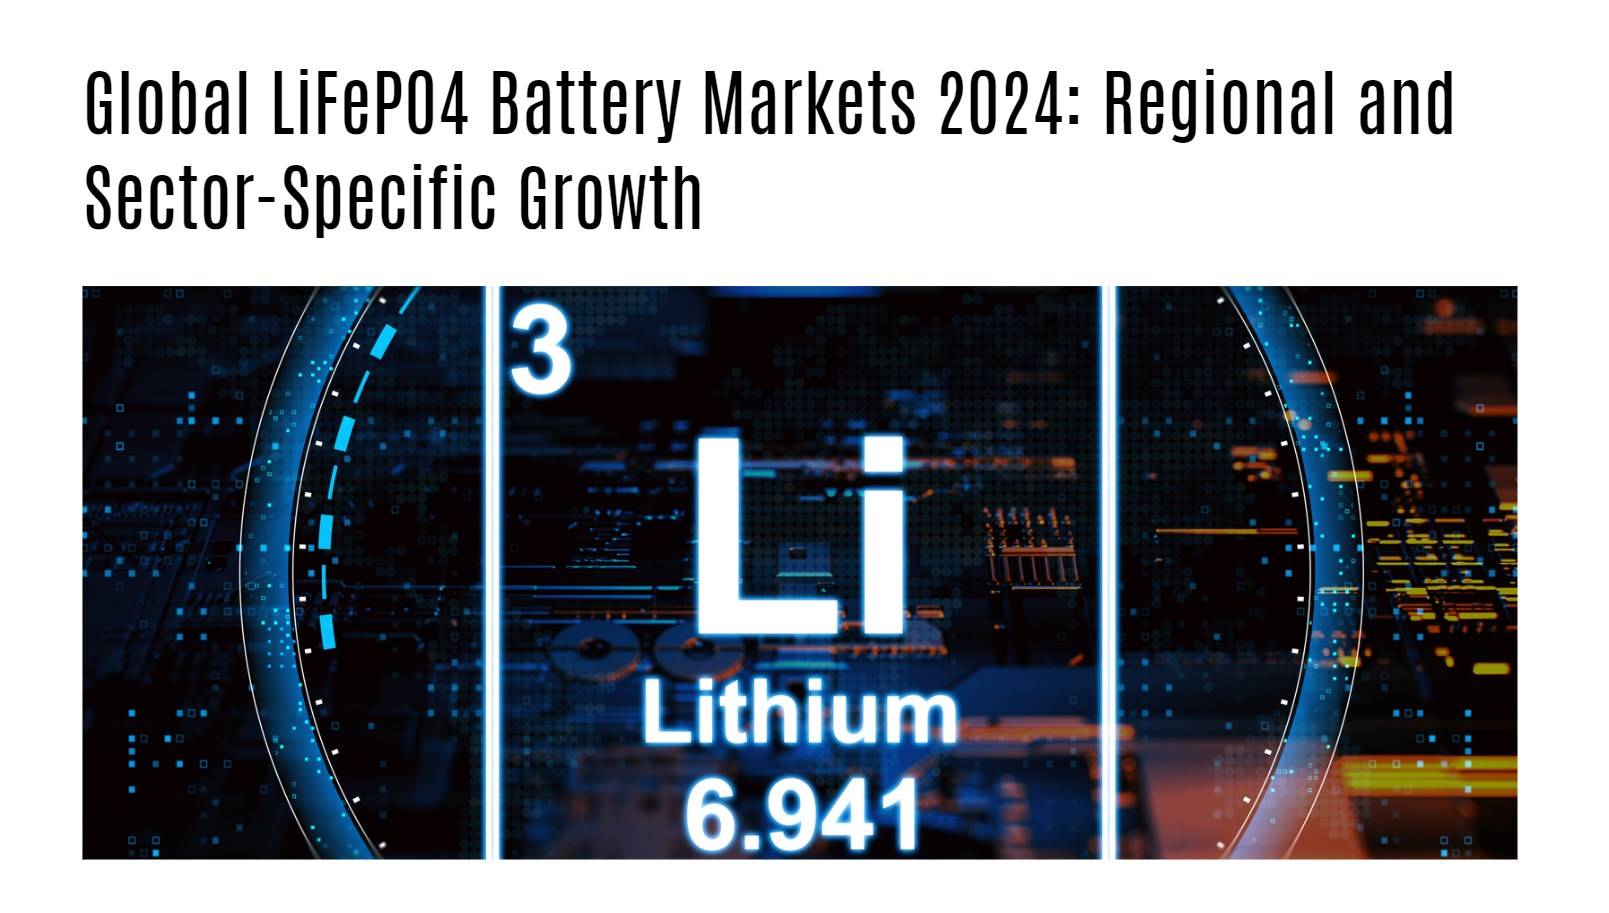 Regional and Sector-Specific Growth. Global Lithium Iron Phosphate (LiFePO4) Battery Markets 2024 review